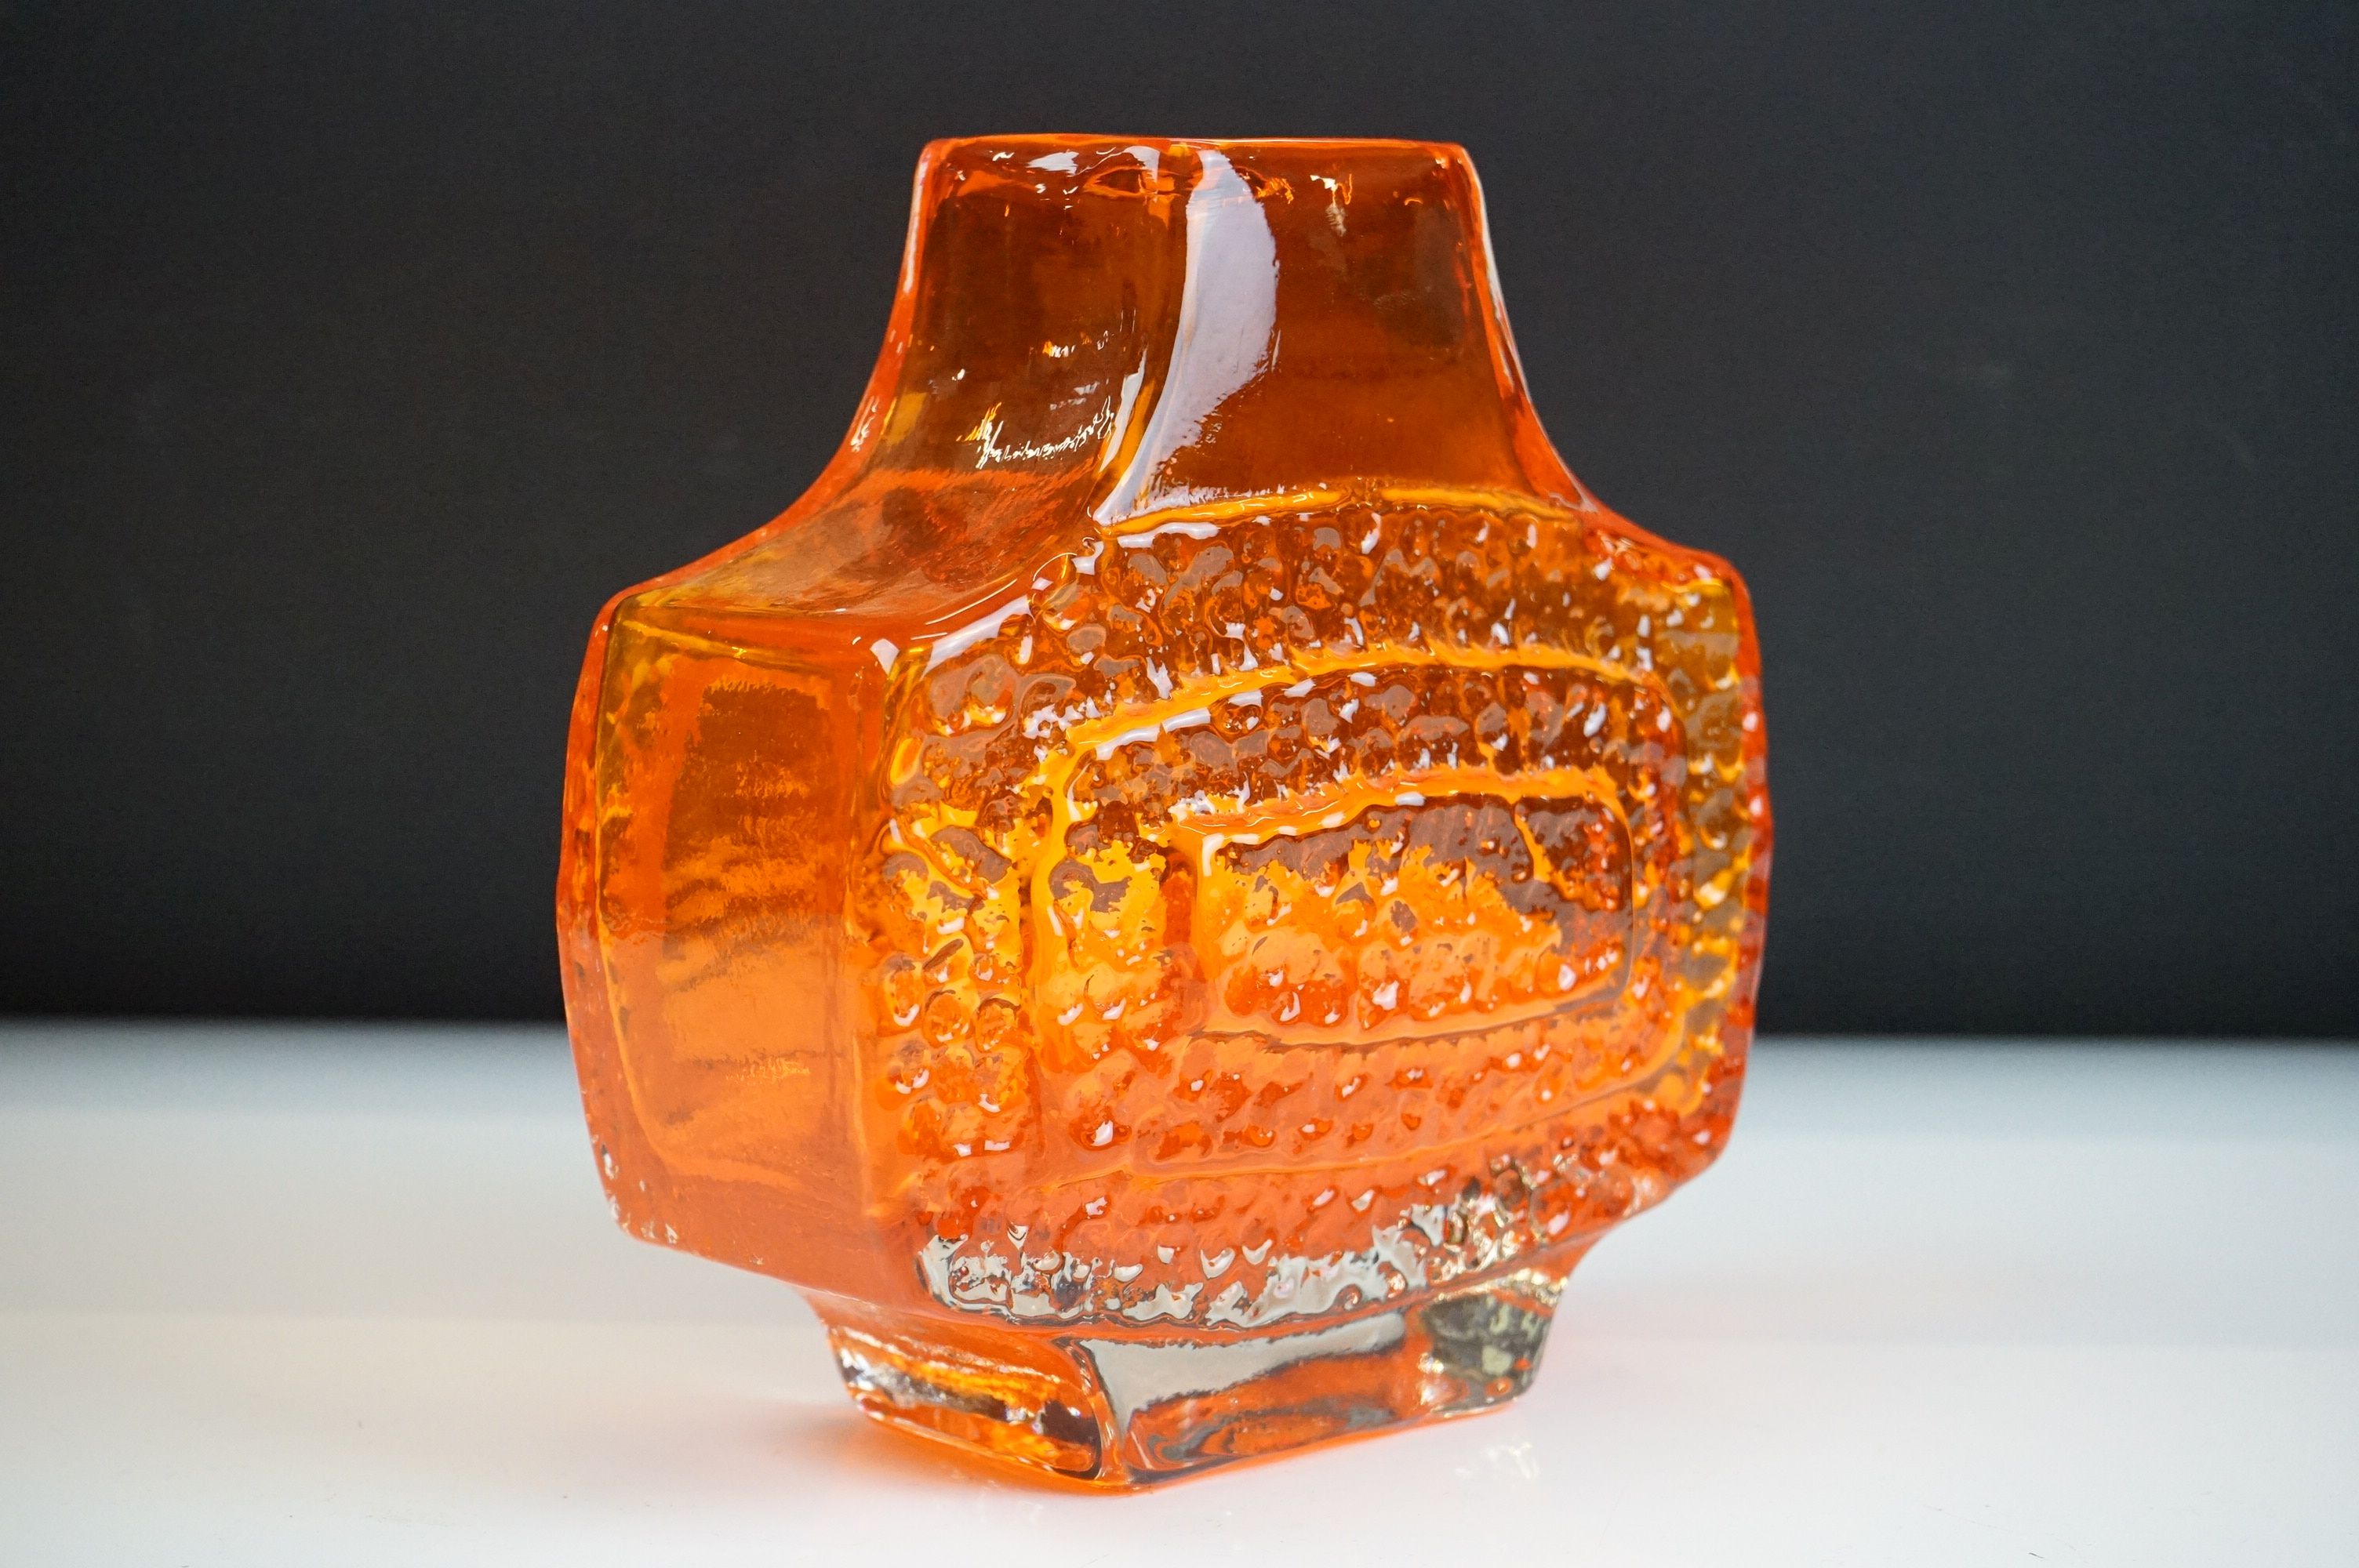 Whitefriars Textured Glass Concentric ' TV ' Pattern Vase, pattern no. 9677, in the Tangerine - Image 3 of 9